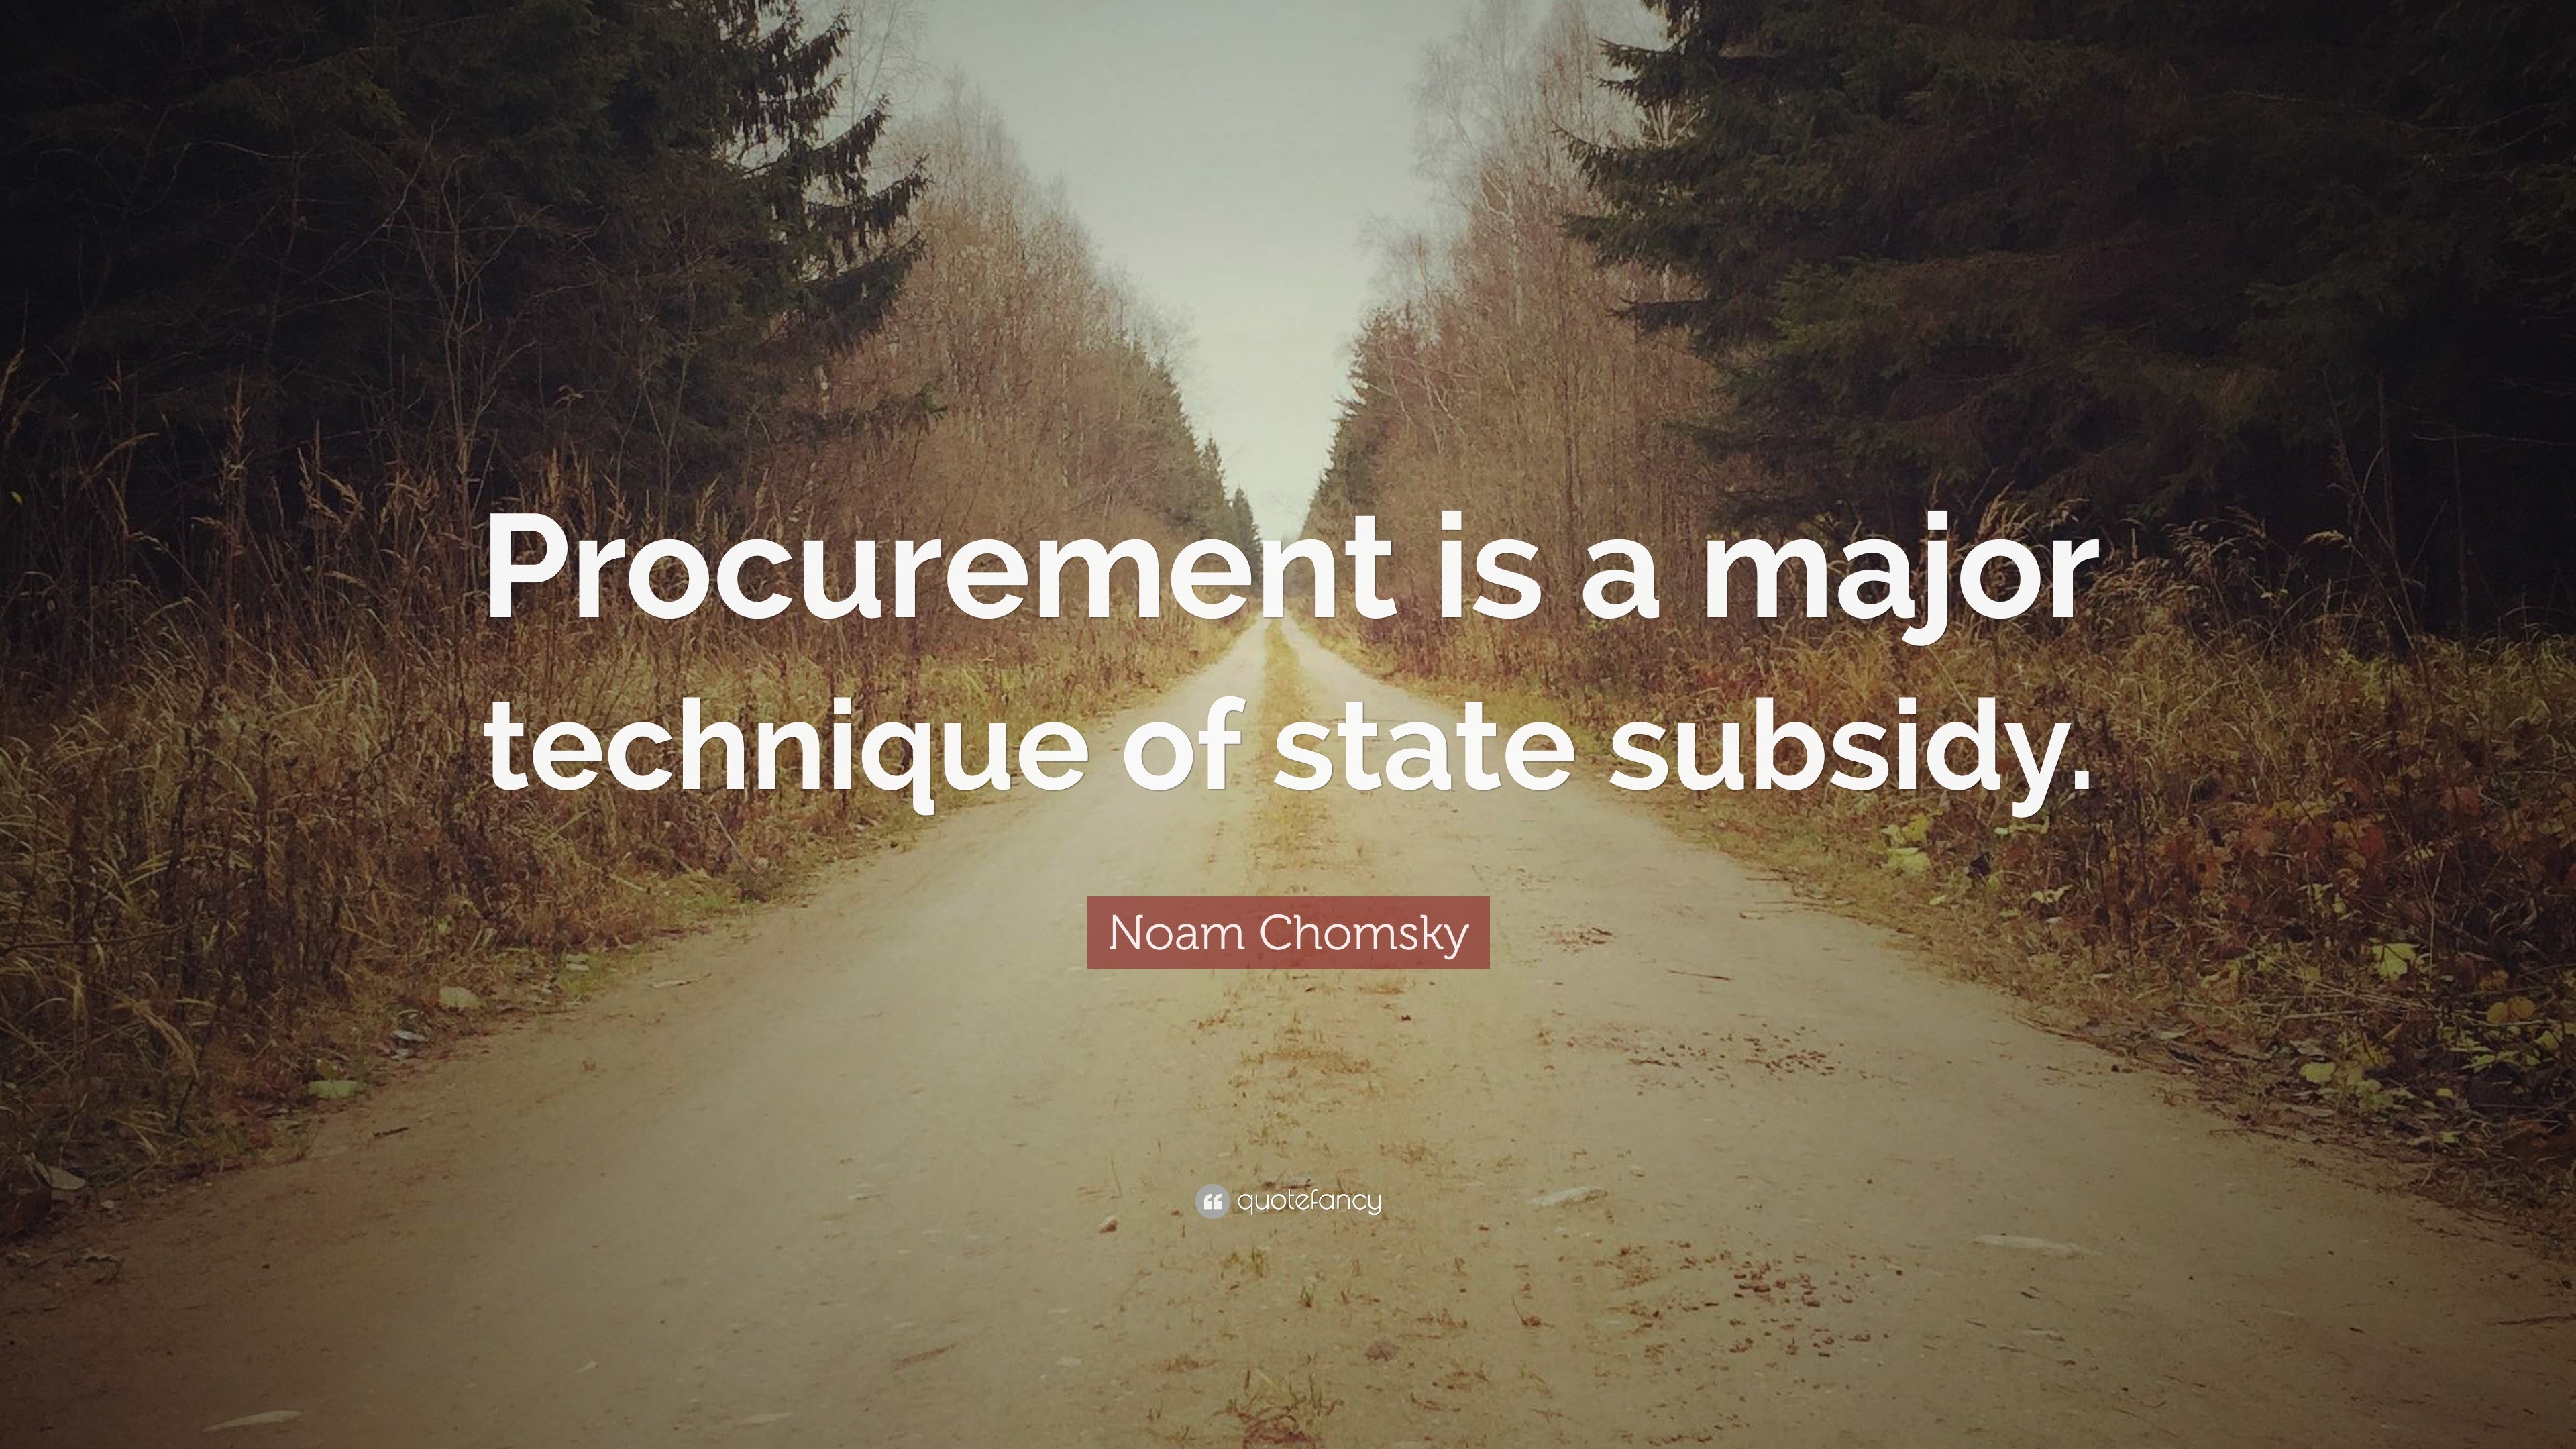 Noam Chomsky Quote “Procurement is a major technique of state subsidy.”